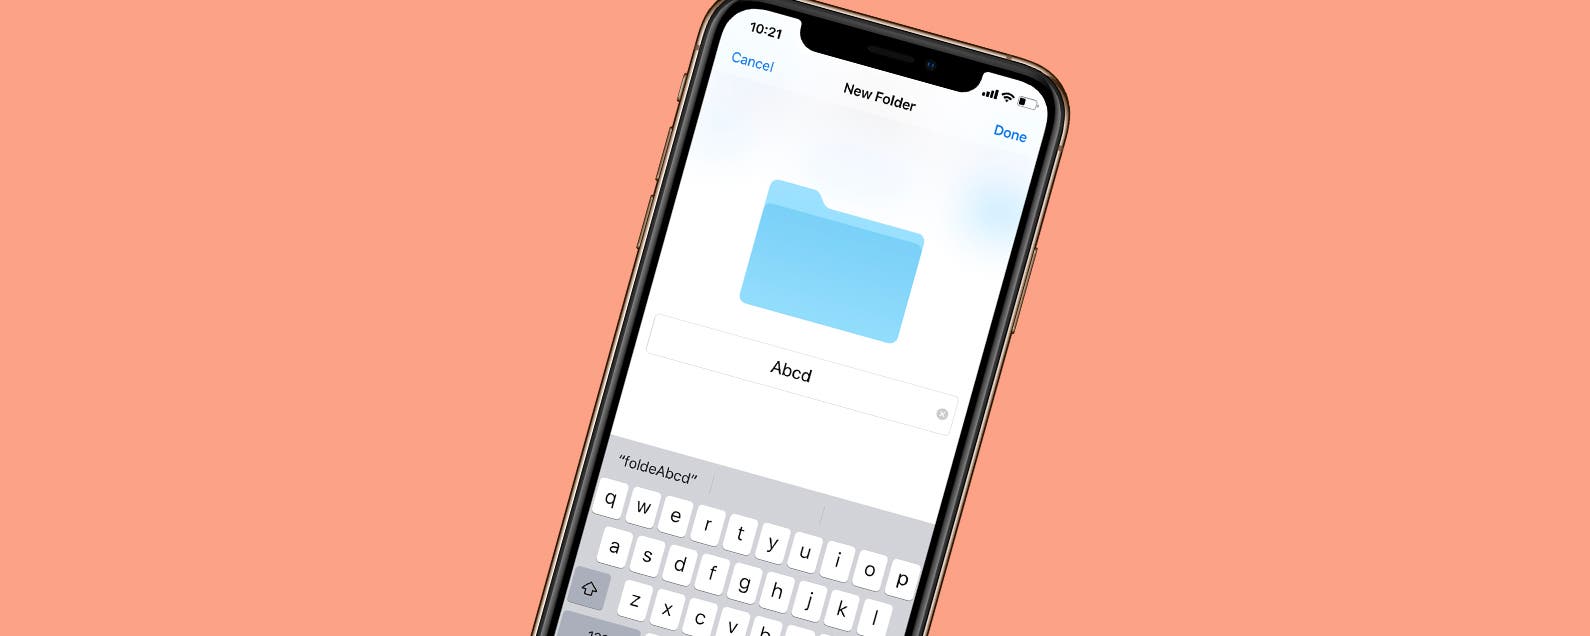 How To Create A New Folder In The Iphone Files App